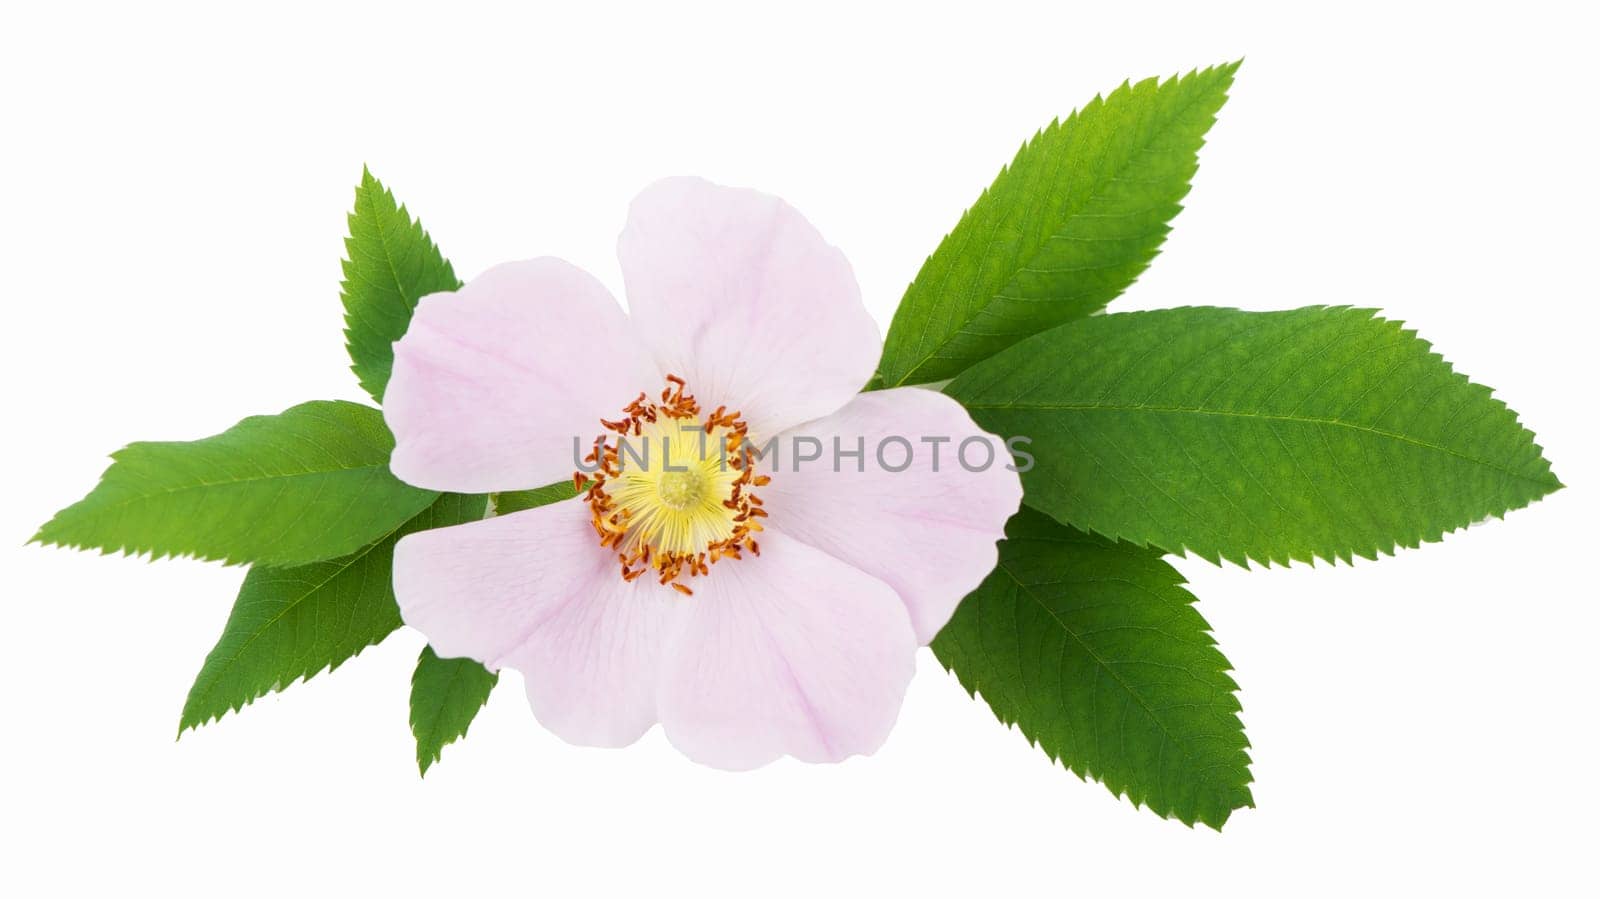 Rosehip pink. Dog rose flowers with leaves, isolated on white background by aprilphoto